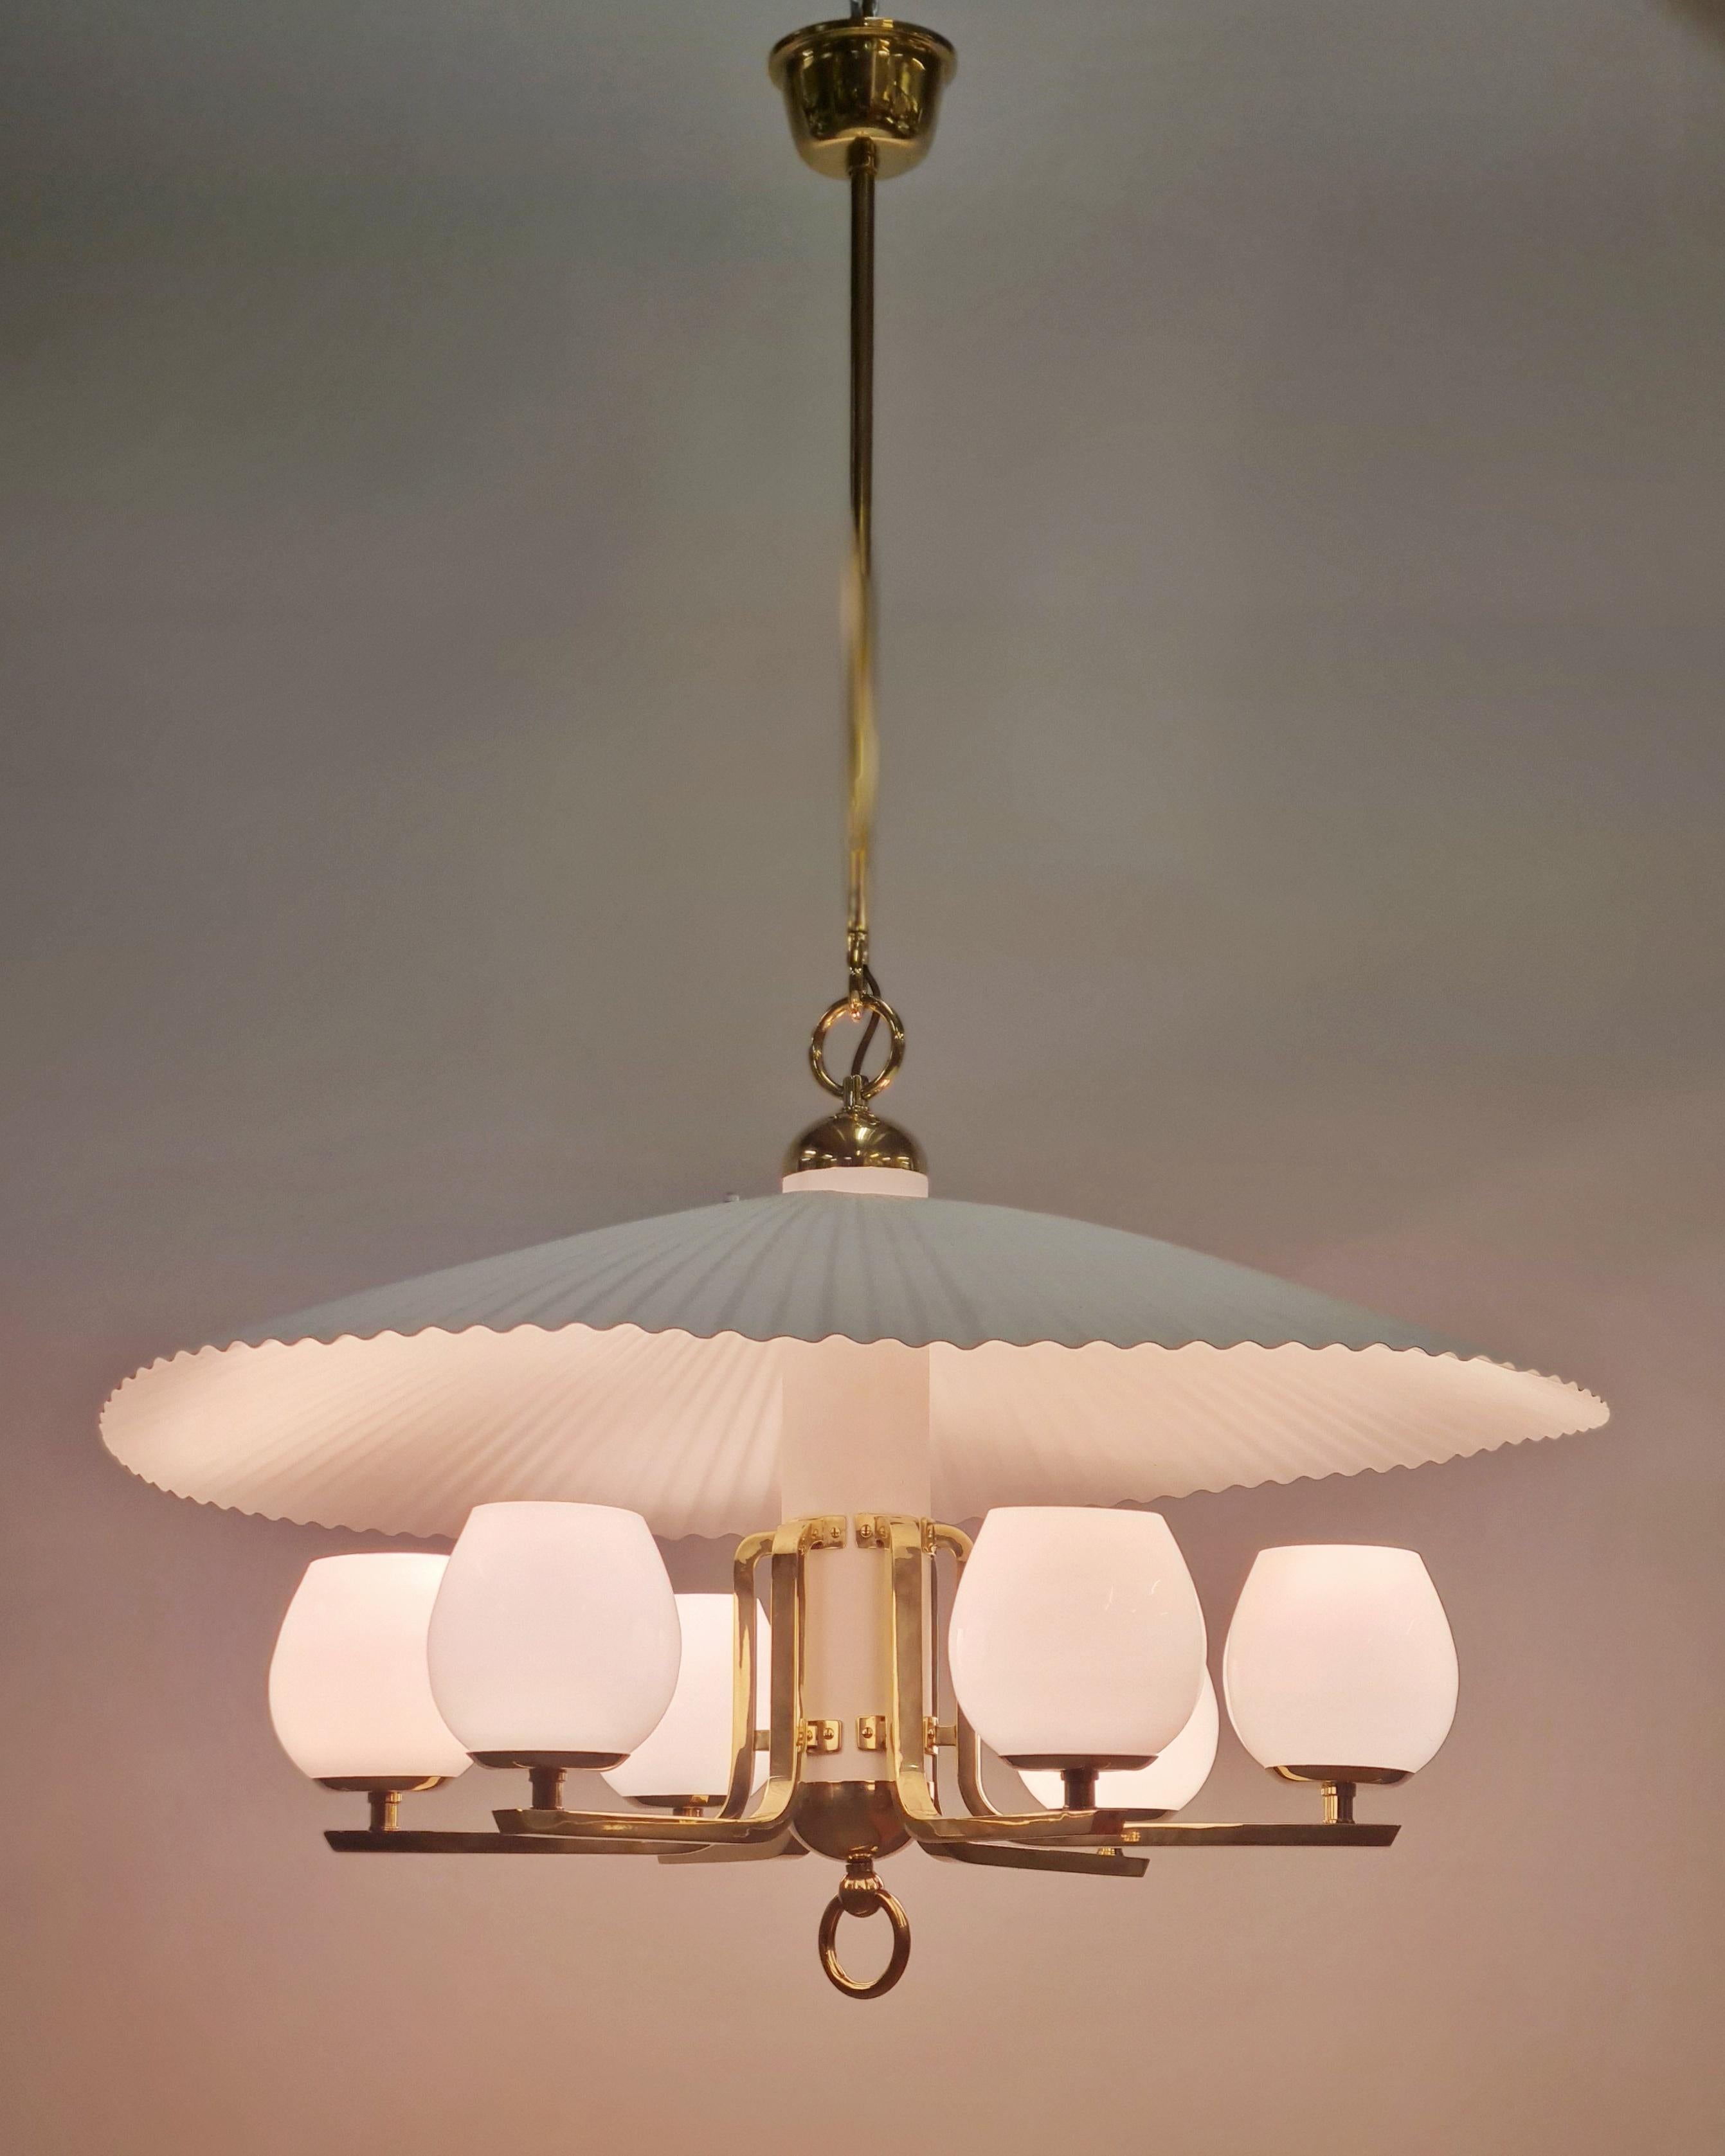 A Comissioned Paavo Tynell Ceiling Lamp, Taito, 1940s For Sale 1